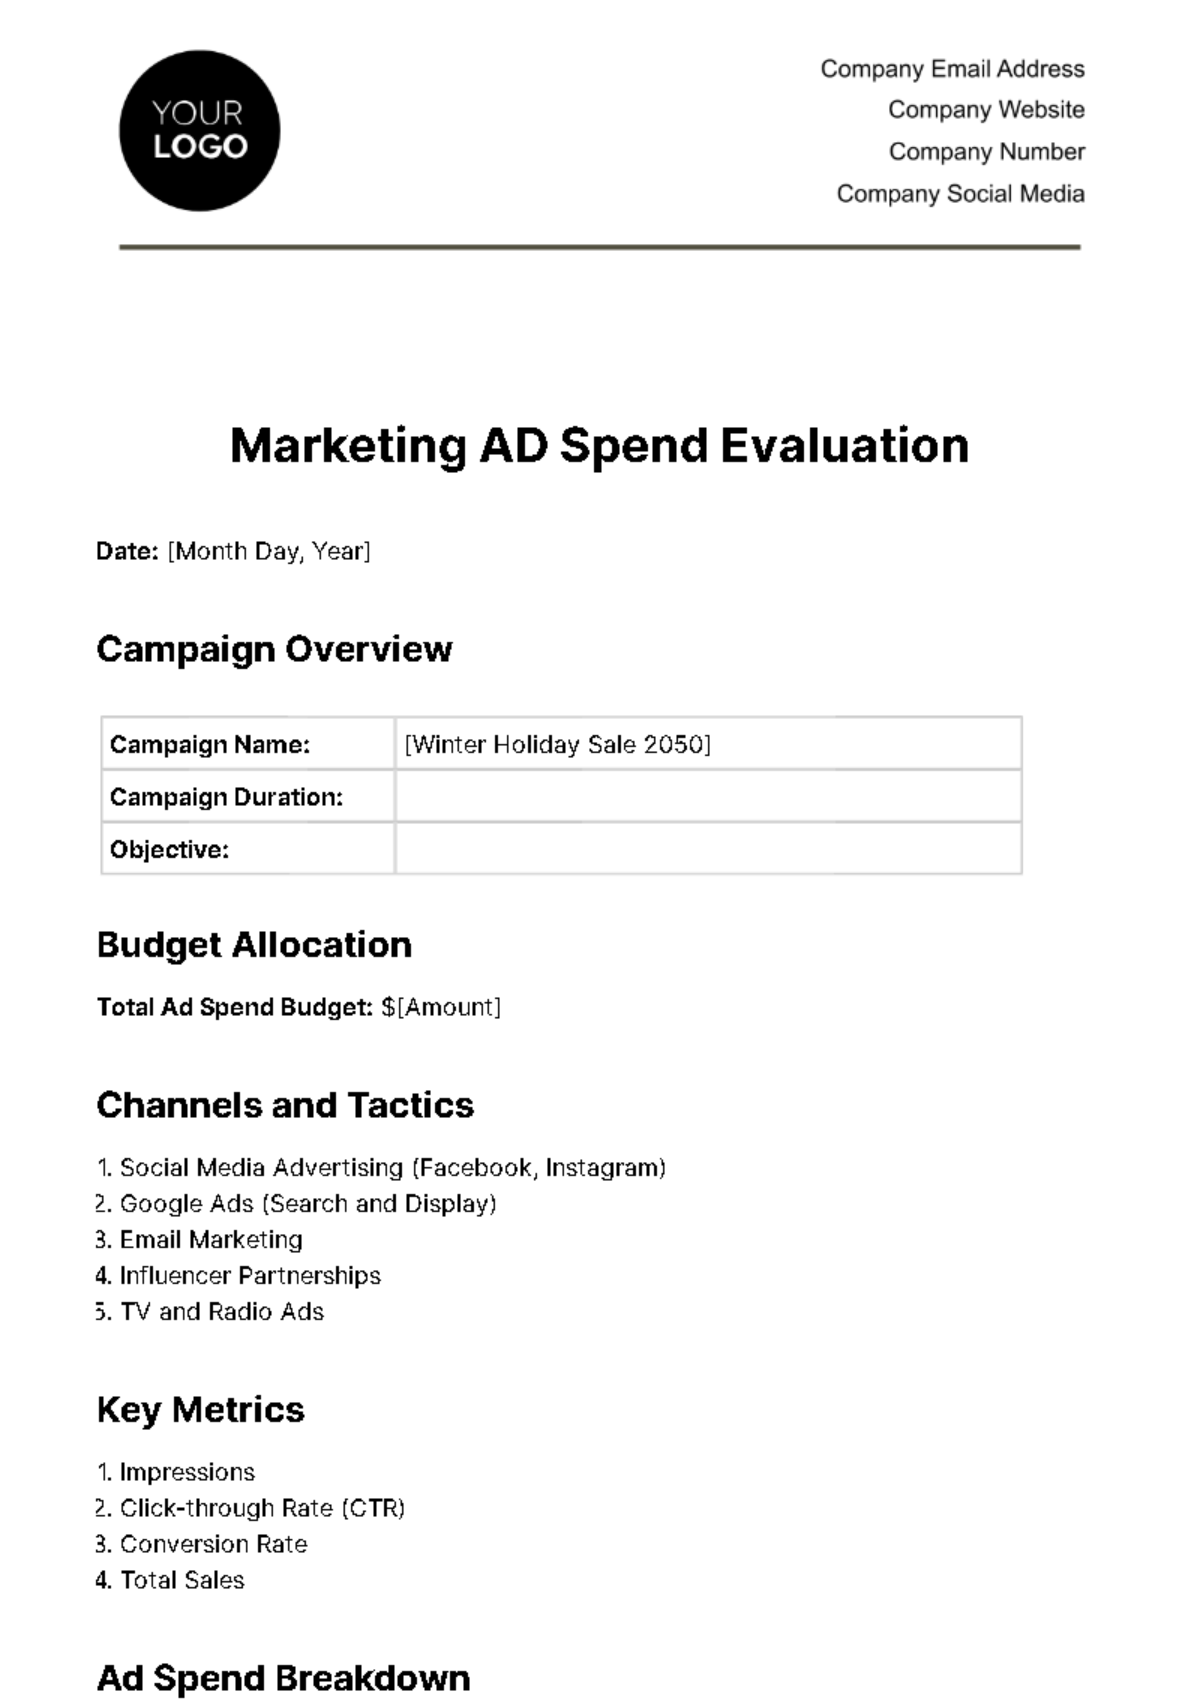 Free Marketing Ad Spend Evaluation Template